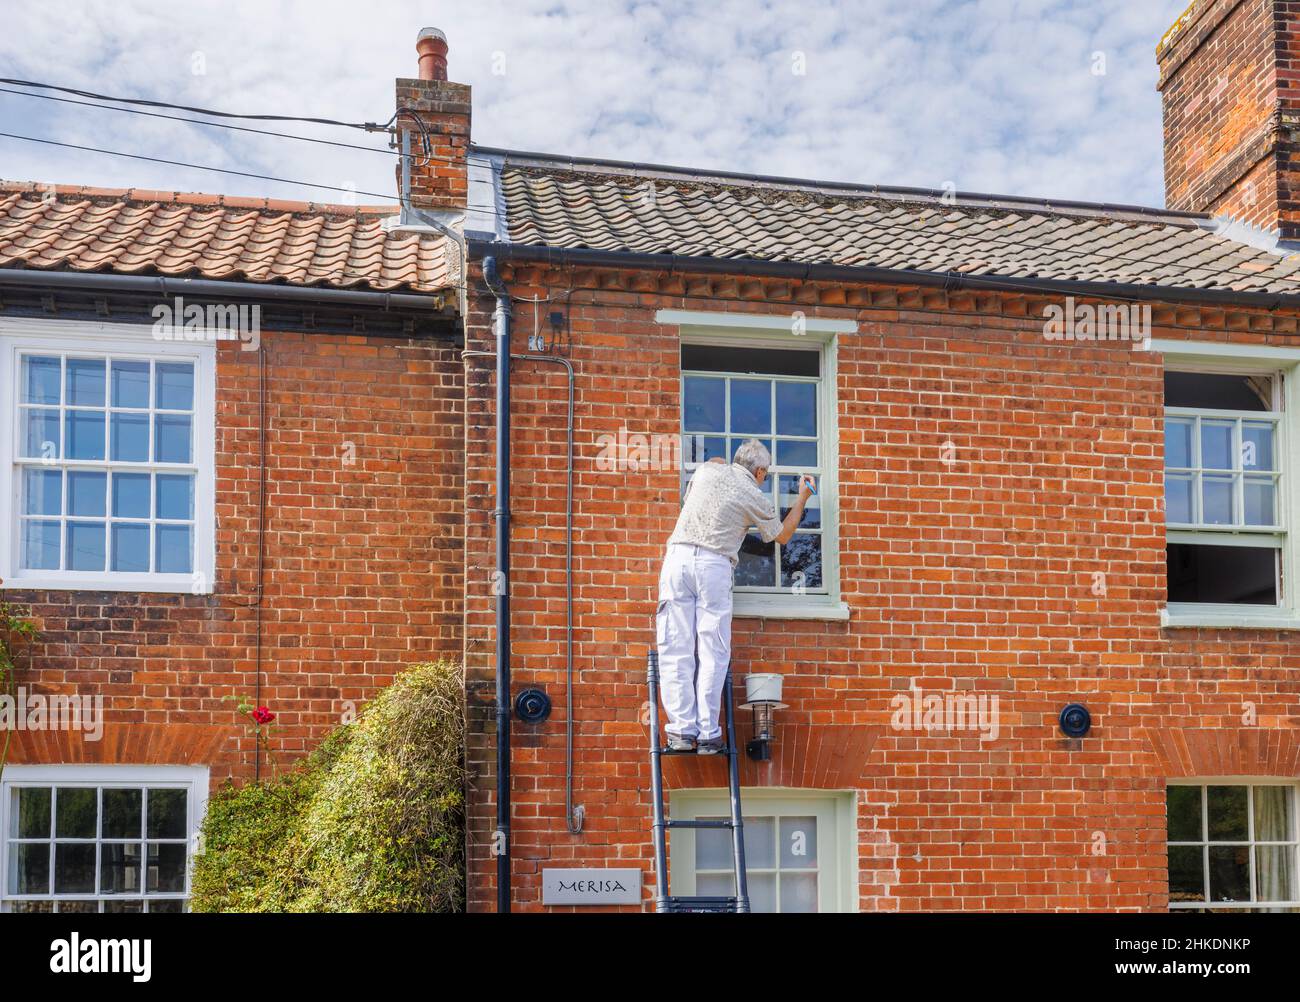 An elderly man on a ladder paints the sash window frame of a house in Cley-Next-The-Sea, a village on the north coast of Norfolk, East Anglia, England Stock Photo